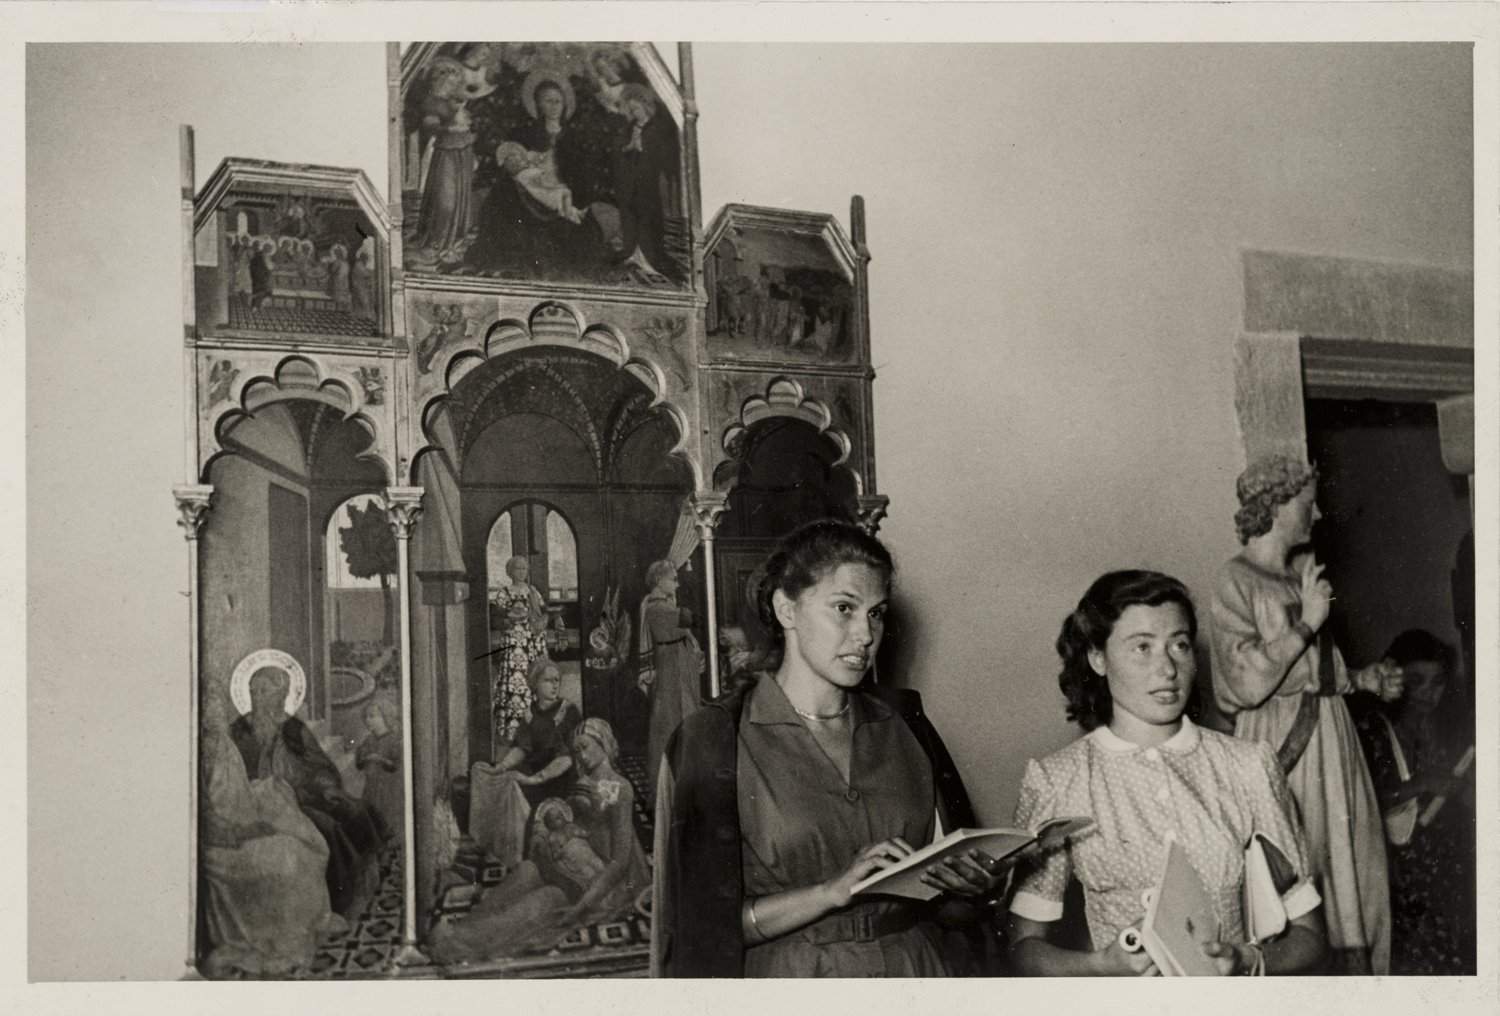 Florence, Paola Barocchi's unpublished photos and Maria Fossi's writings tell the story of the city during the war